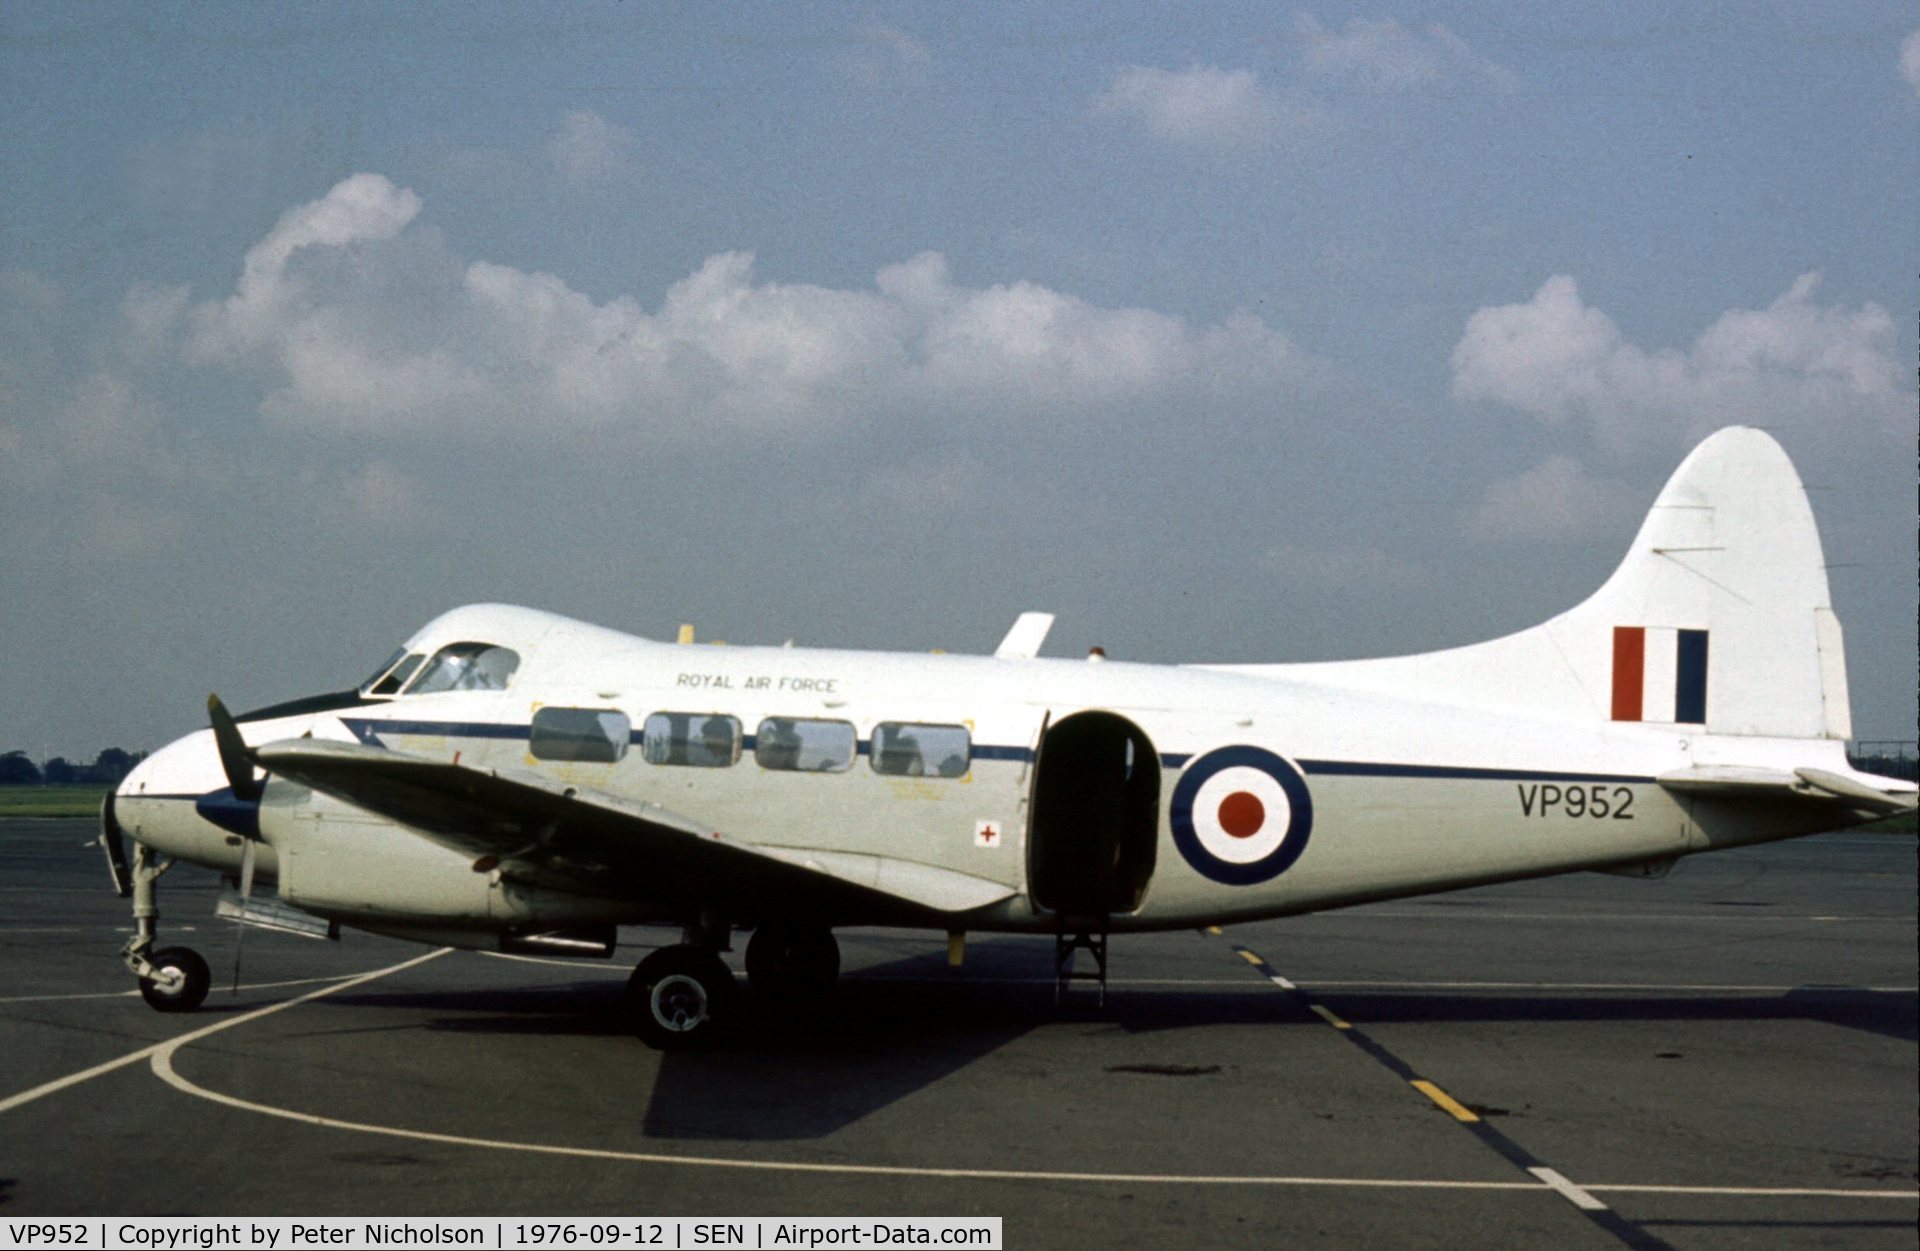 VP952, De Havilland DH-104 Devon C.2 C/N 04048, Now preserved in the RAF Museum at Cosford, in the Summer of 1976 this Devon C.2 was the 207 Squadron support aircraft for the Battle of Britain Memorial Flight.